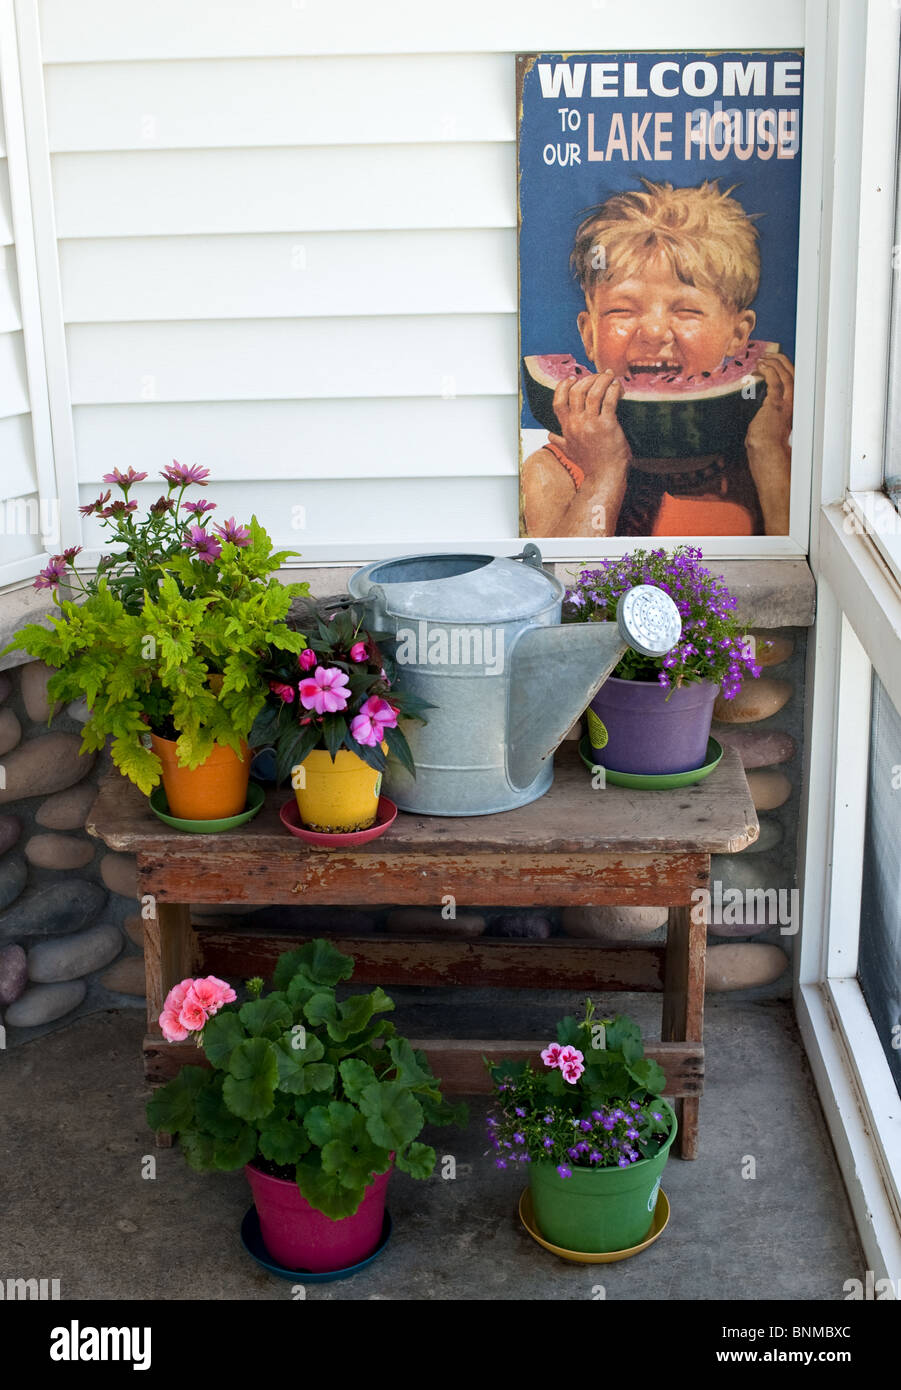 Lake porch with flower on a bench with a tin watering can and a welcoming sign. Stock Photo